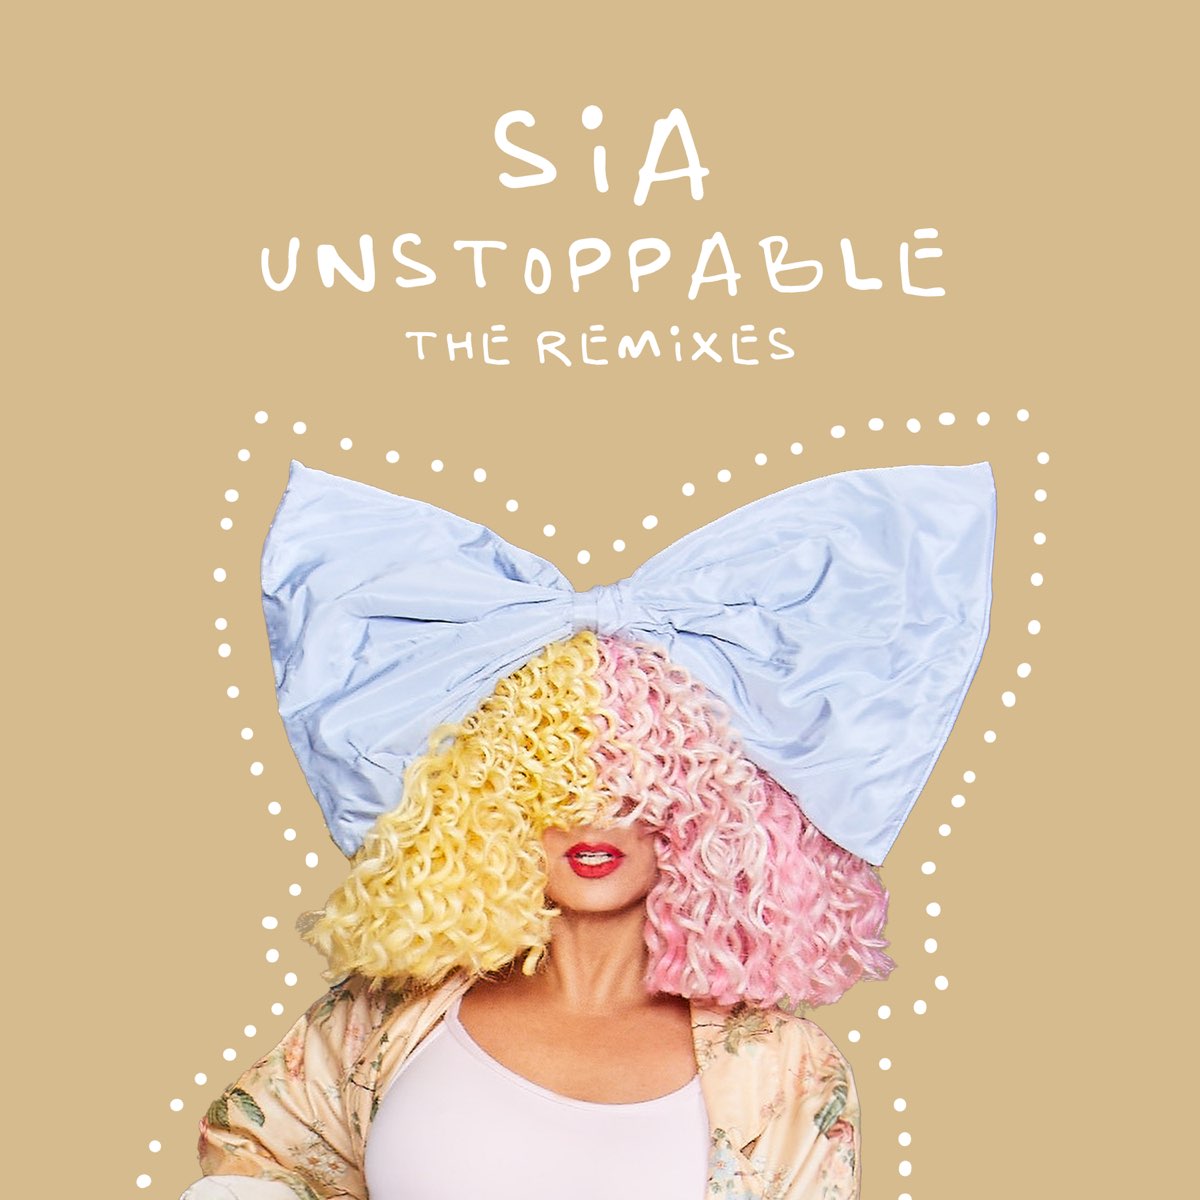 ‎Unstoppable (The Remixes) Single by Sia on Apple Music